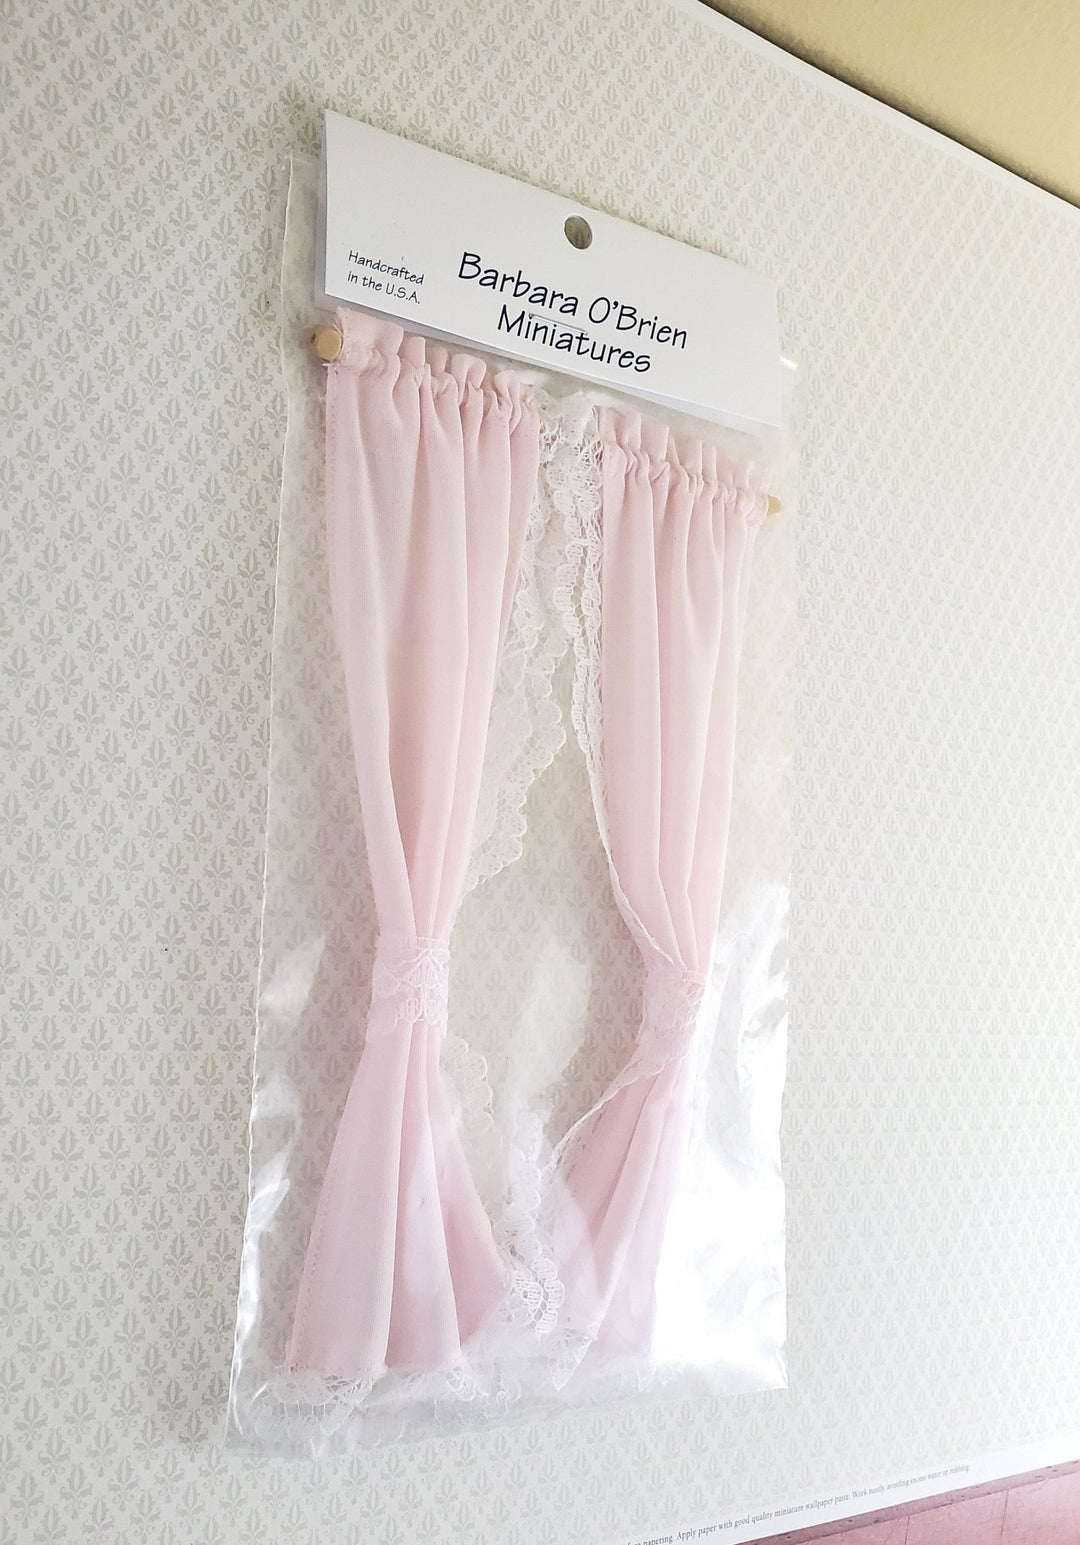 Dollhouse Miniature Curtains Pink with Lace & Curtain Rod 1:12 Scale Handmade - Miniature Crush